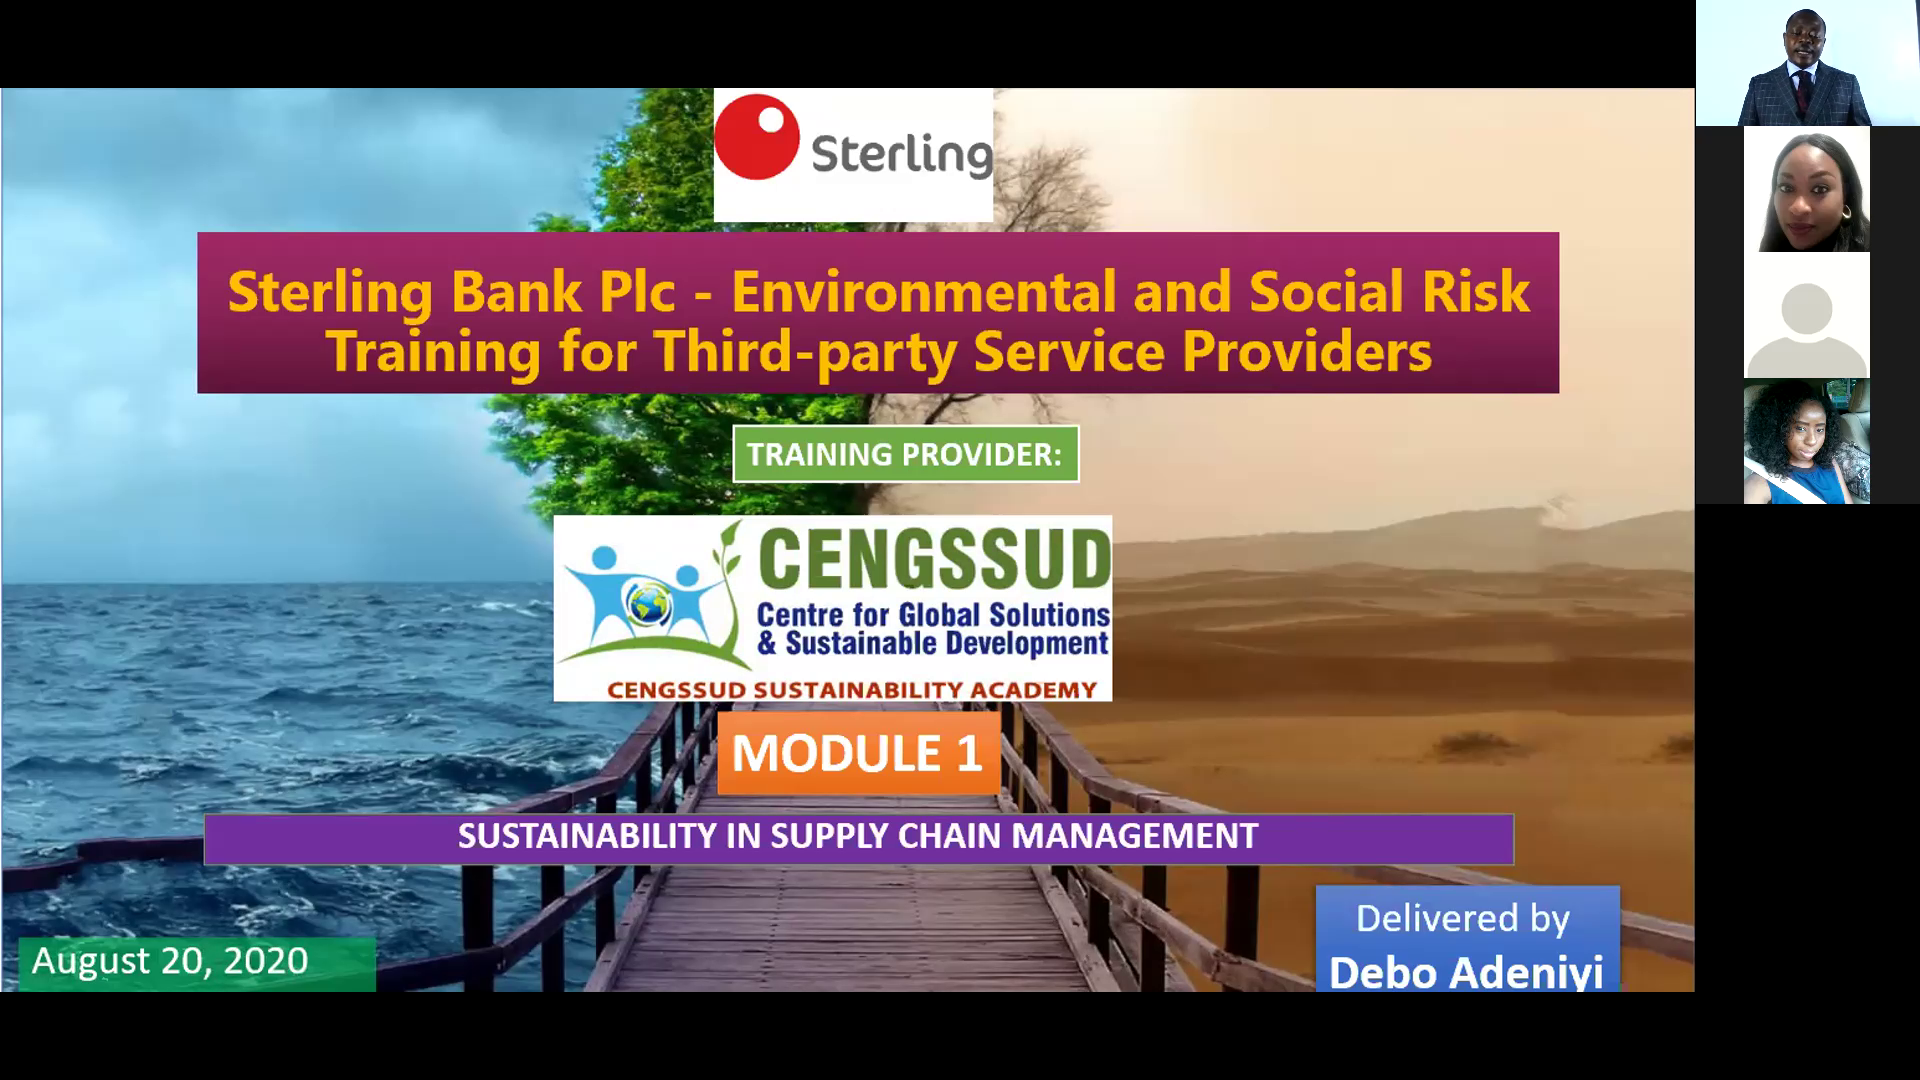 In-house Training for Sterling Bank Plc – Environmental and Social Risk Training for Third-party Service Providers